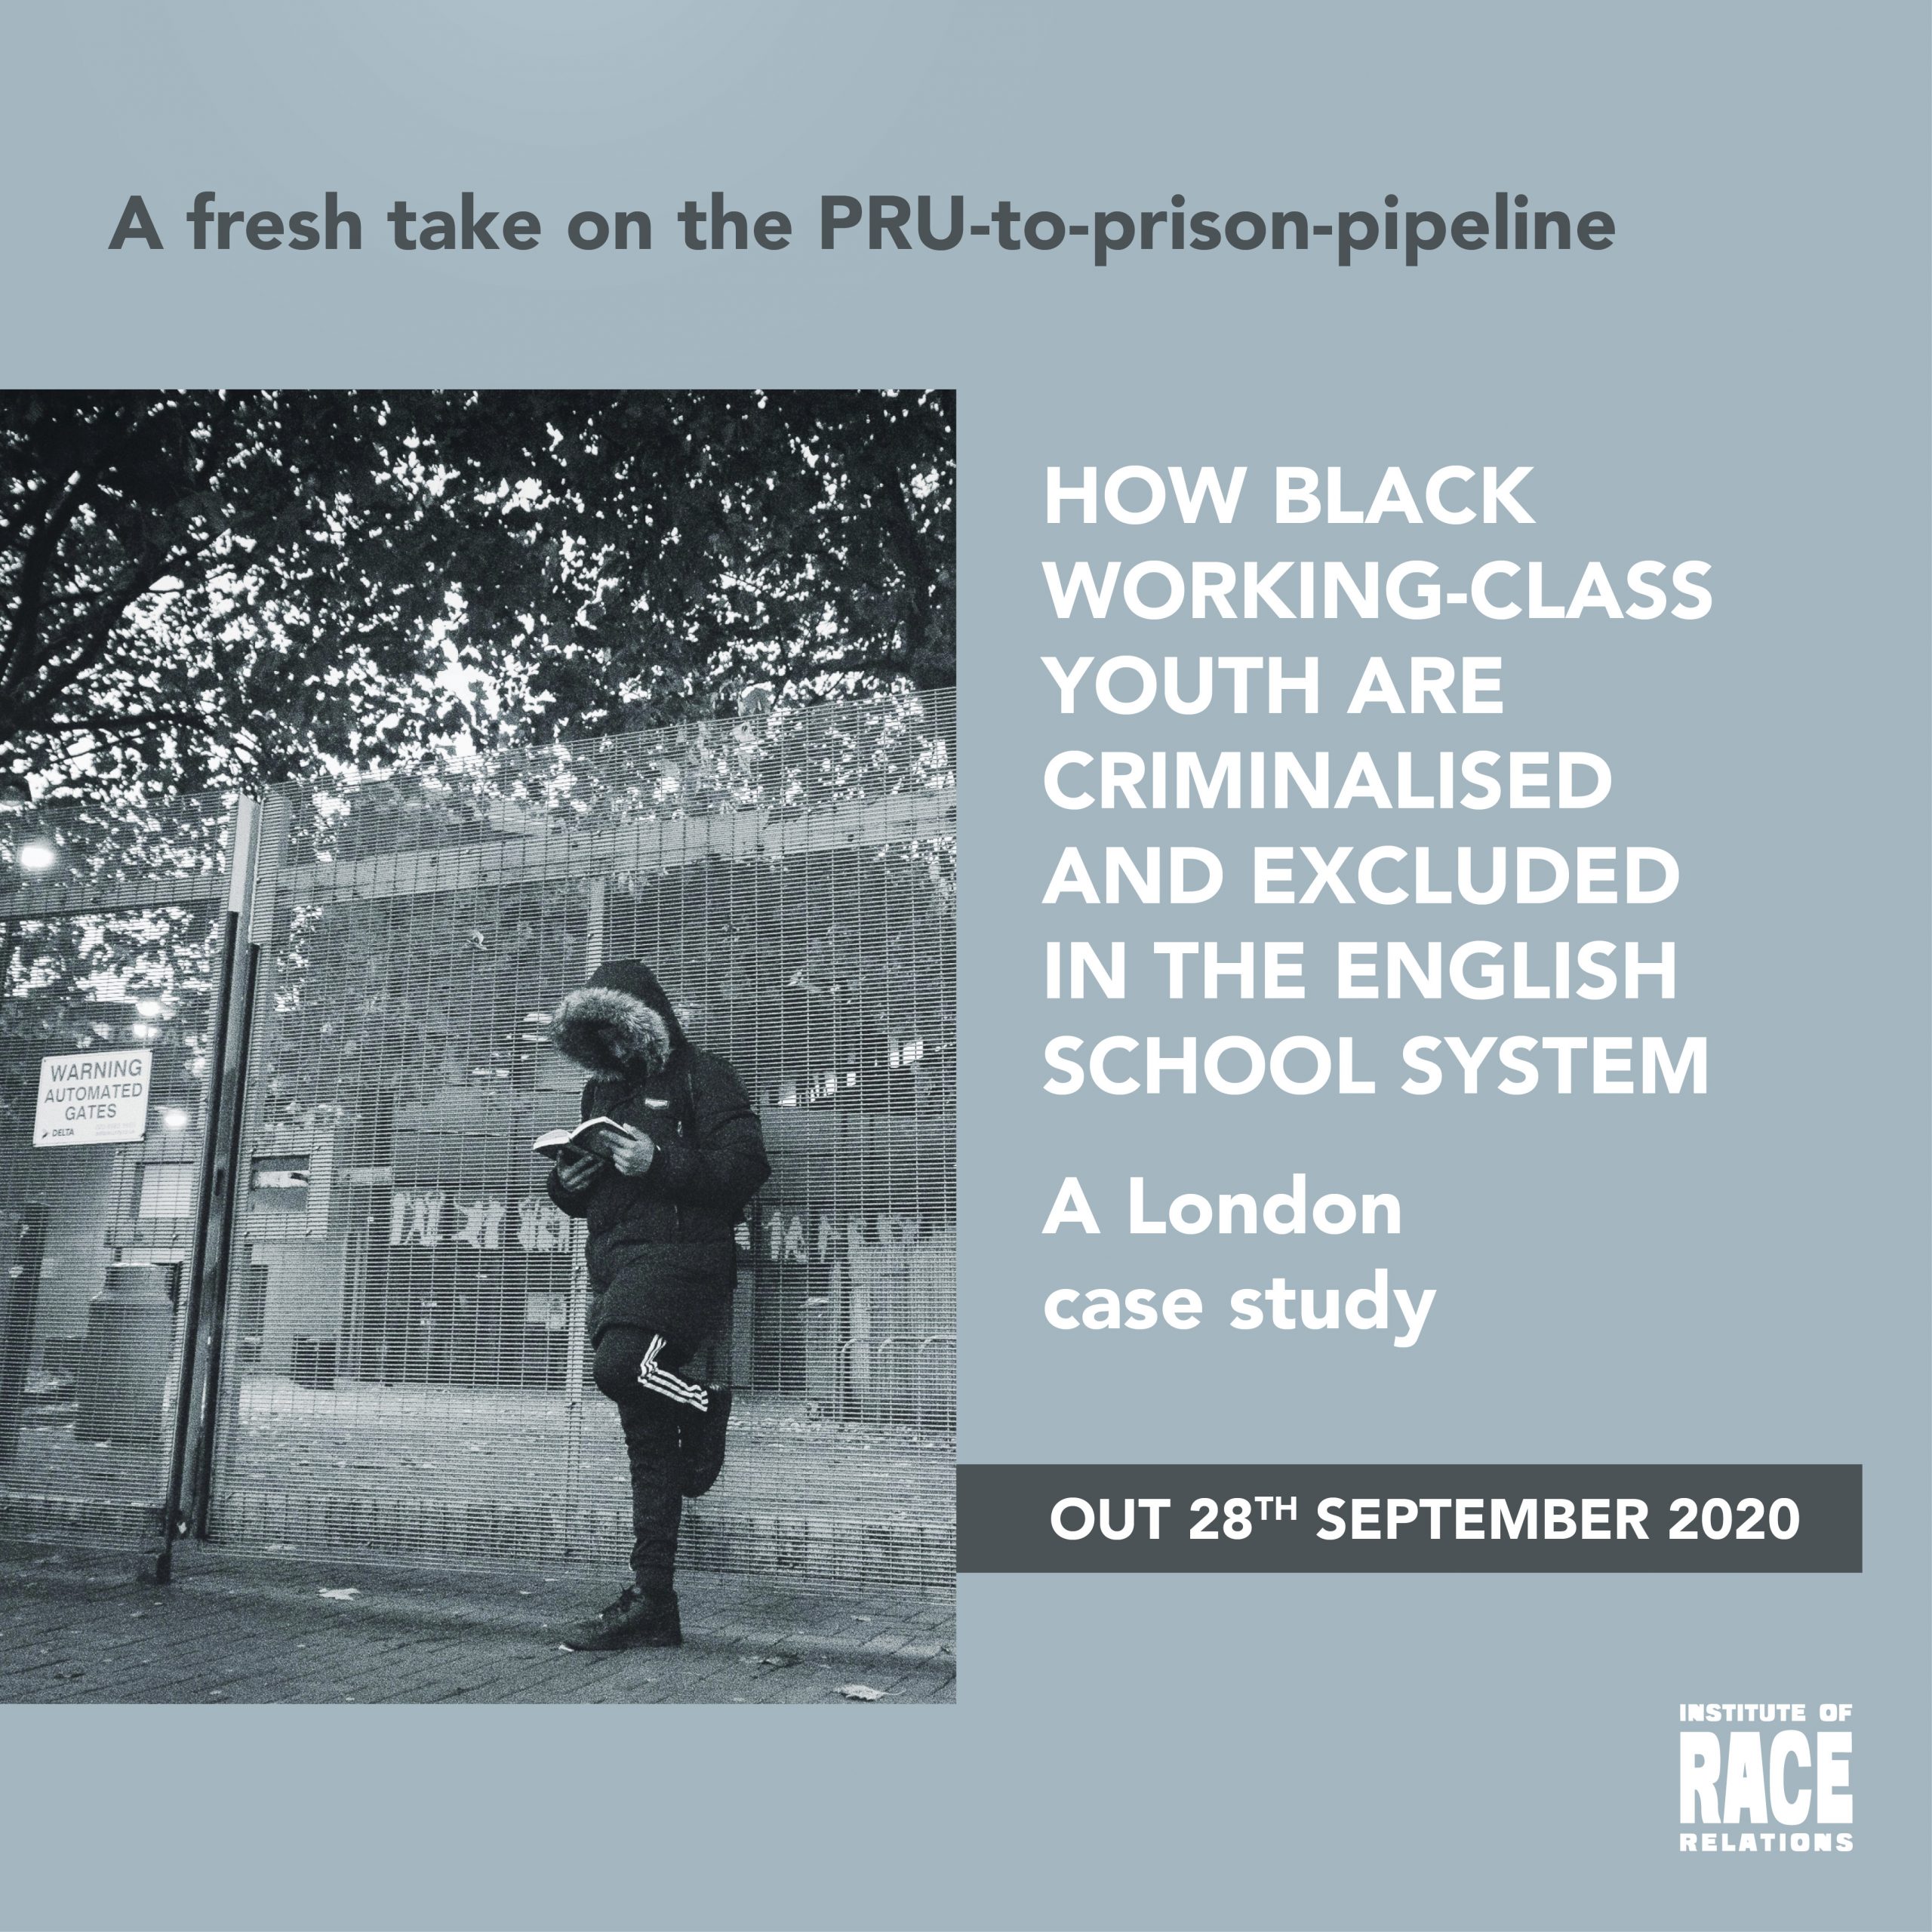 How Black Working-Class Youth are Criminalised and Excluded in the English School System